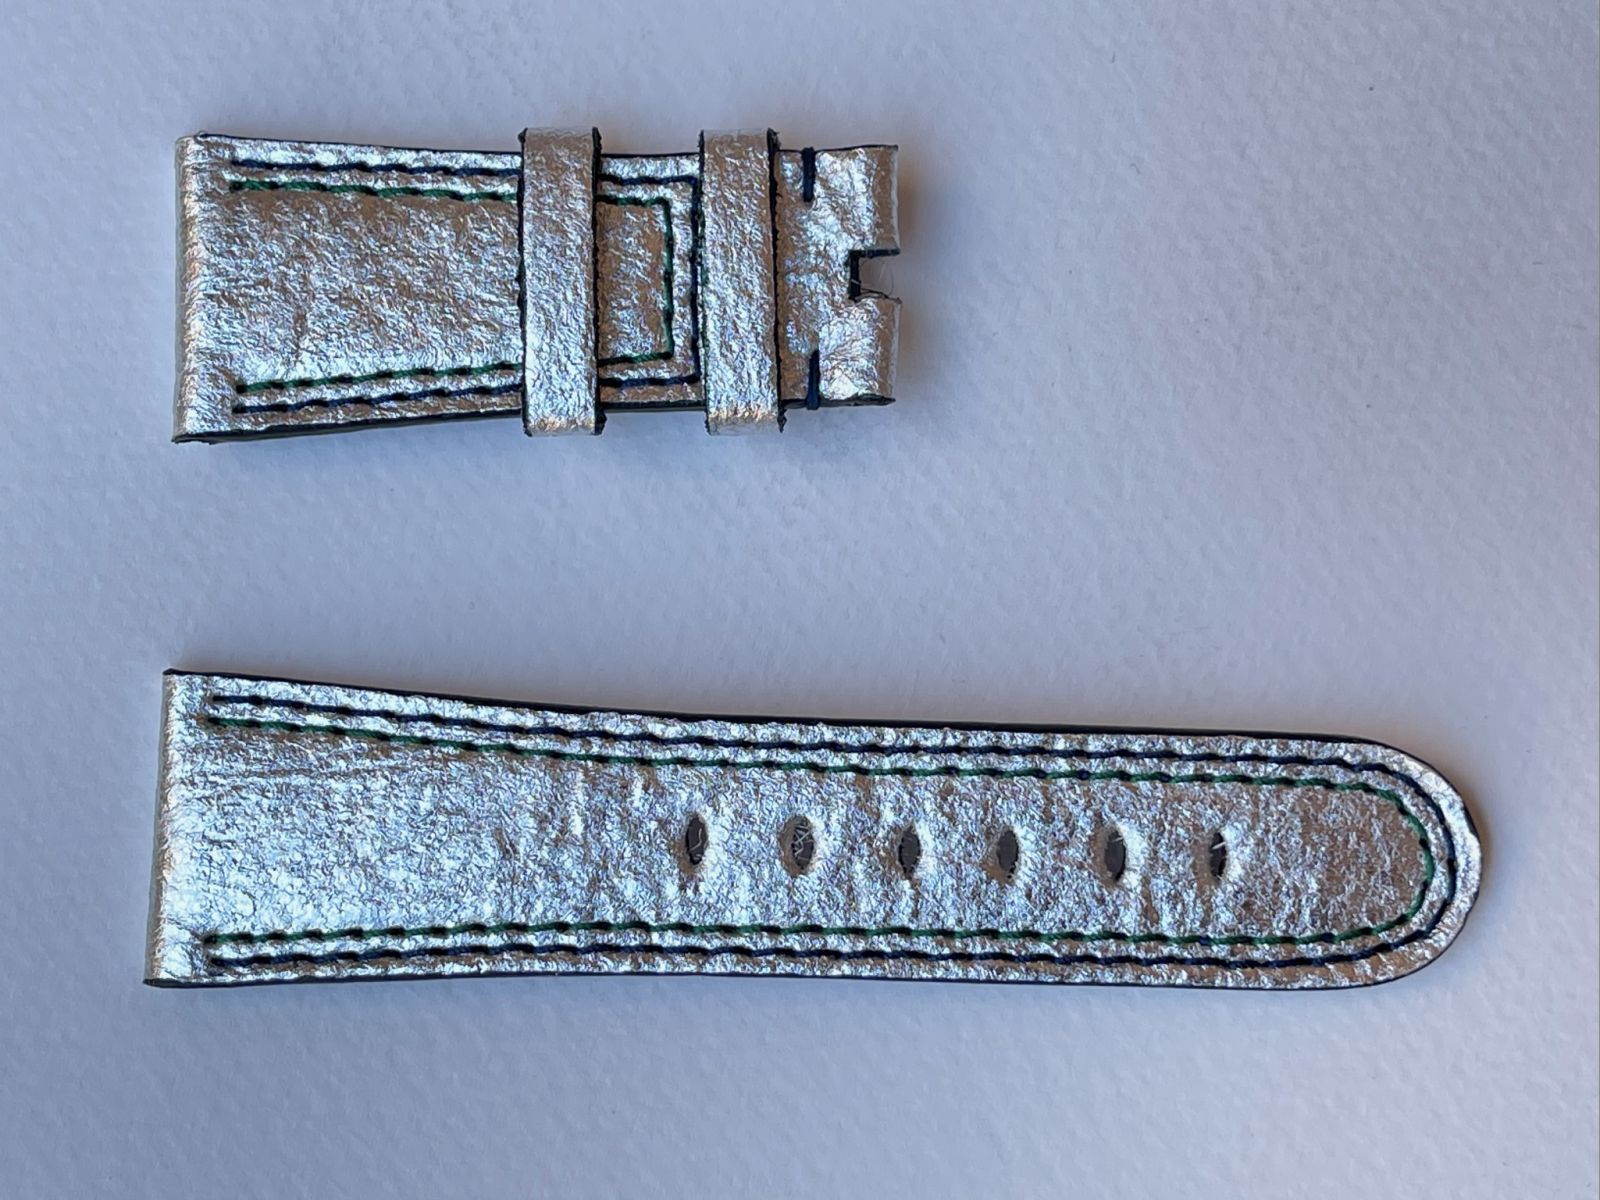 Silver Metallic Pinatex Strap 16mm, 18mm, 19mm, 20mm, 21mm, 22mm, 24mm General style. Double stitching